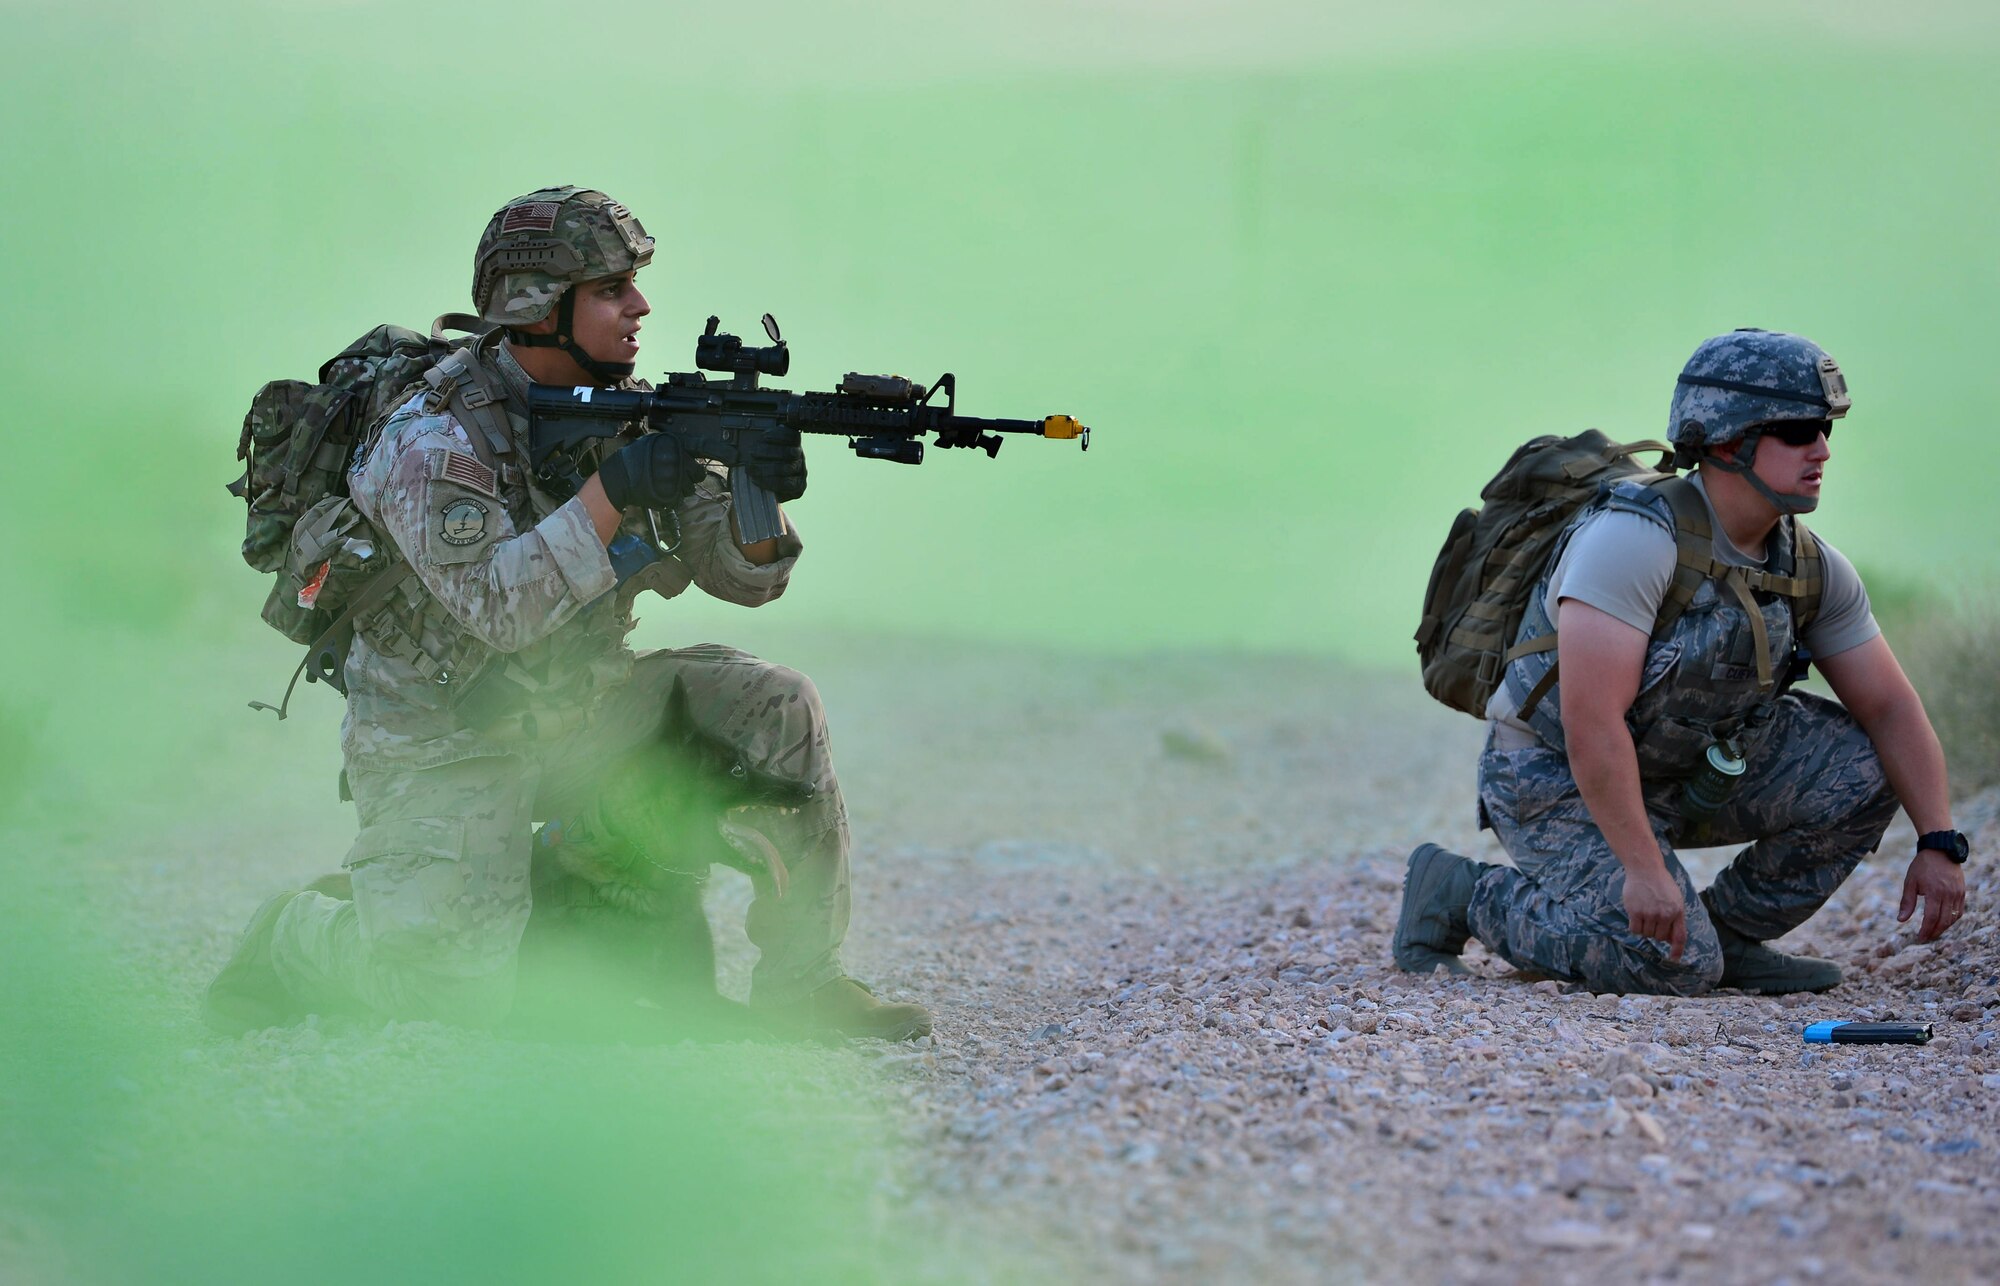 Staff Sgt. Juan Hinojosa, 99th Security Forces Squadron military working dog handler and Erik, 99th SFS MWD, respond to a simulated “live-fire” scenario during a training exercise Aug. 8, 2018, at Nellis Air Force Base, Nev. This portion of the training was to test the dog’s reaction to the sound of live gunfire and explosives while also testing how their handler would react to the situation. (U.S. Air Force Photo by Airman 1st Class Haley Stevens)